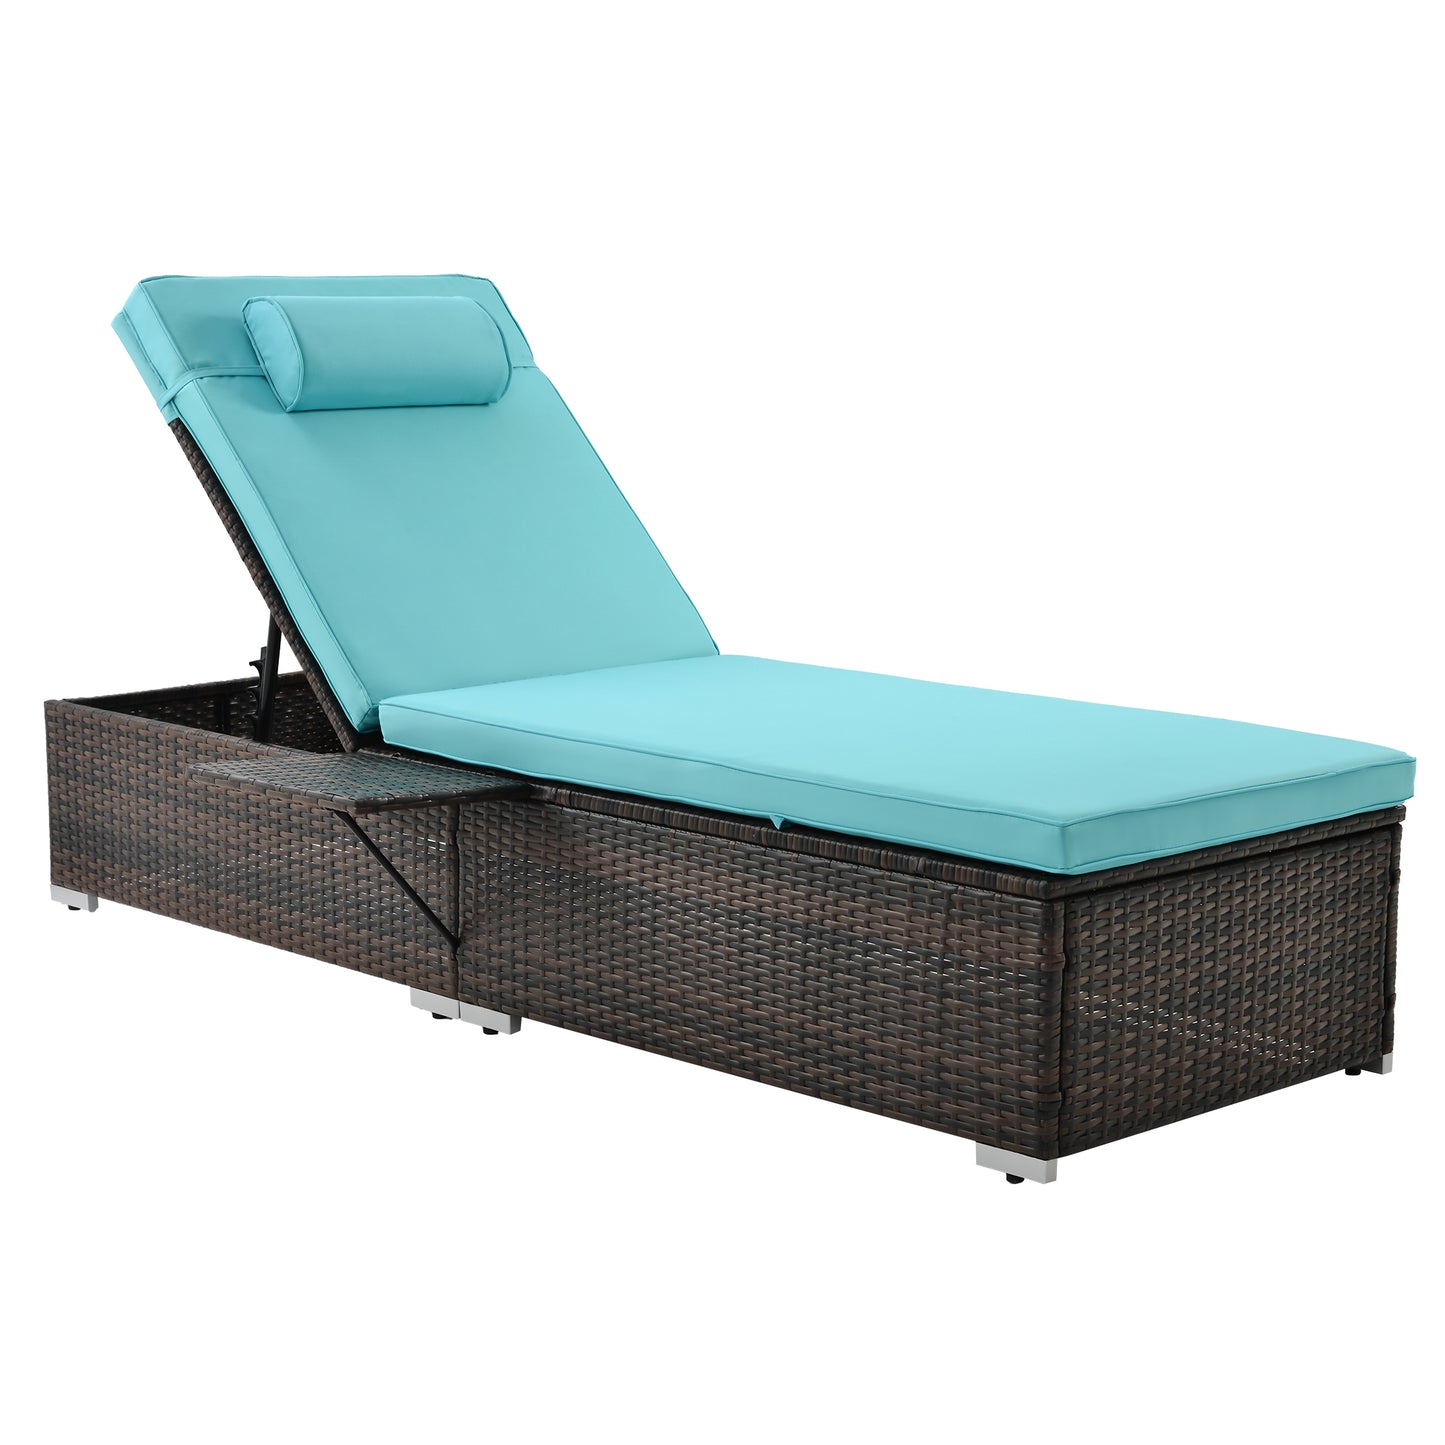 Outdoor PE Wicker Chaise Lounge - 2 Piece patio lounge chair